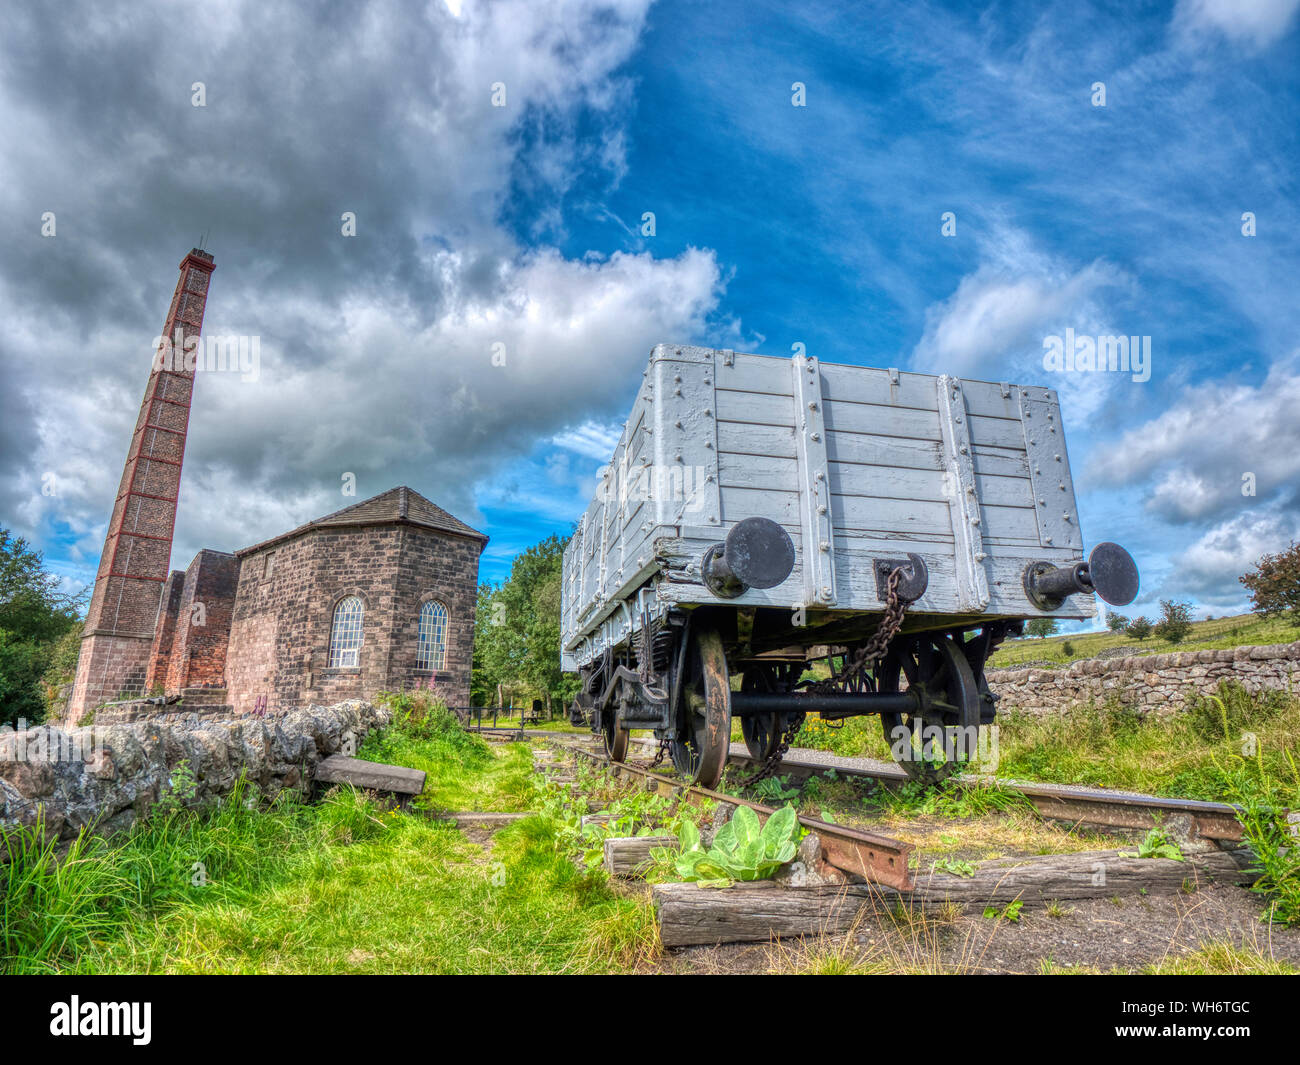 railway cart & engine house at Middleton Top, Middleton by Wirksworth, Derbyshire, England, UK, a 800 mile long distance off-road cycle route from Middleton Top, Wirksworth, Derbyshire through the Peak District all the way up to Cape Wrath or John o'Groats, Scotland. Stock Photo